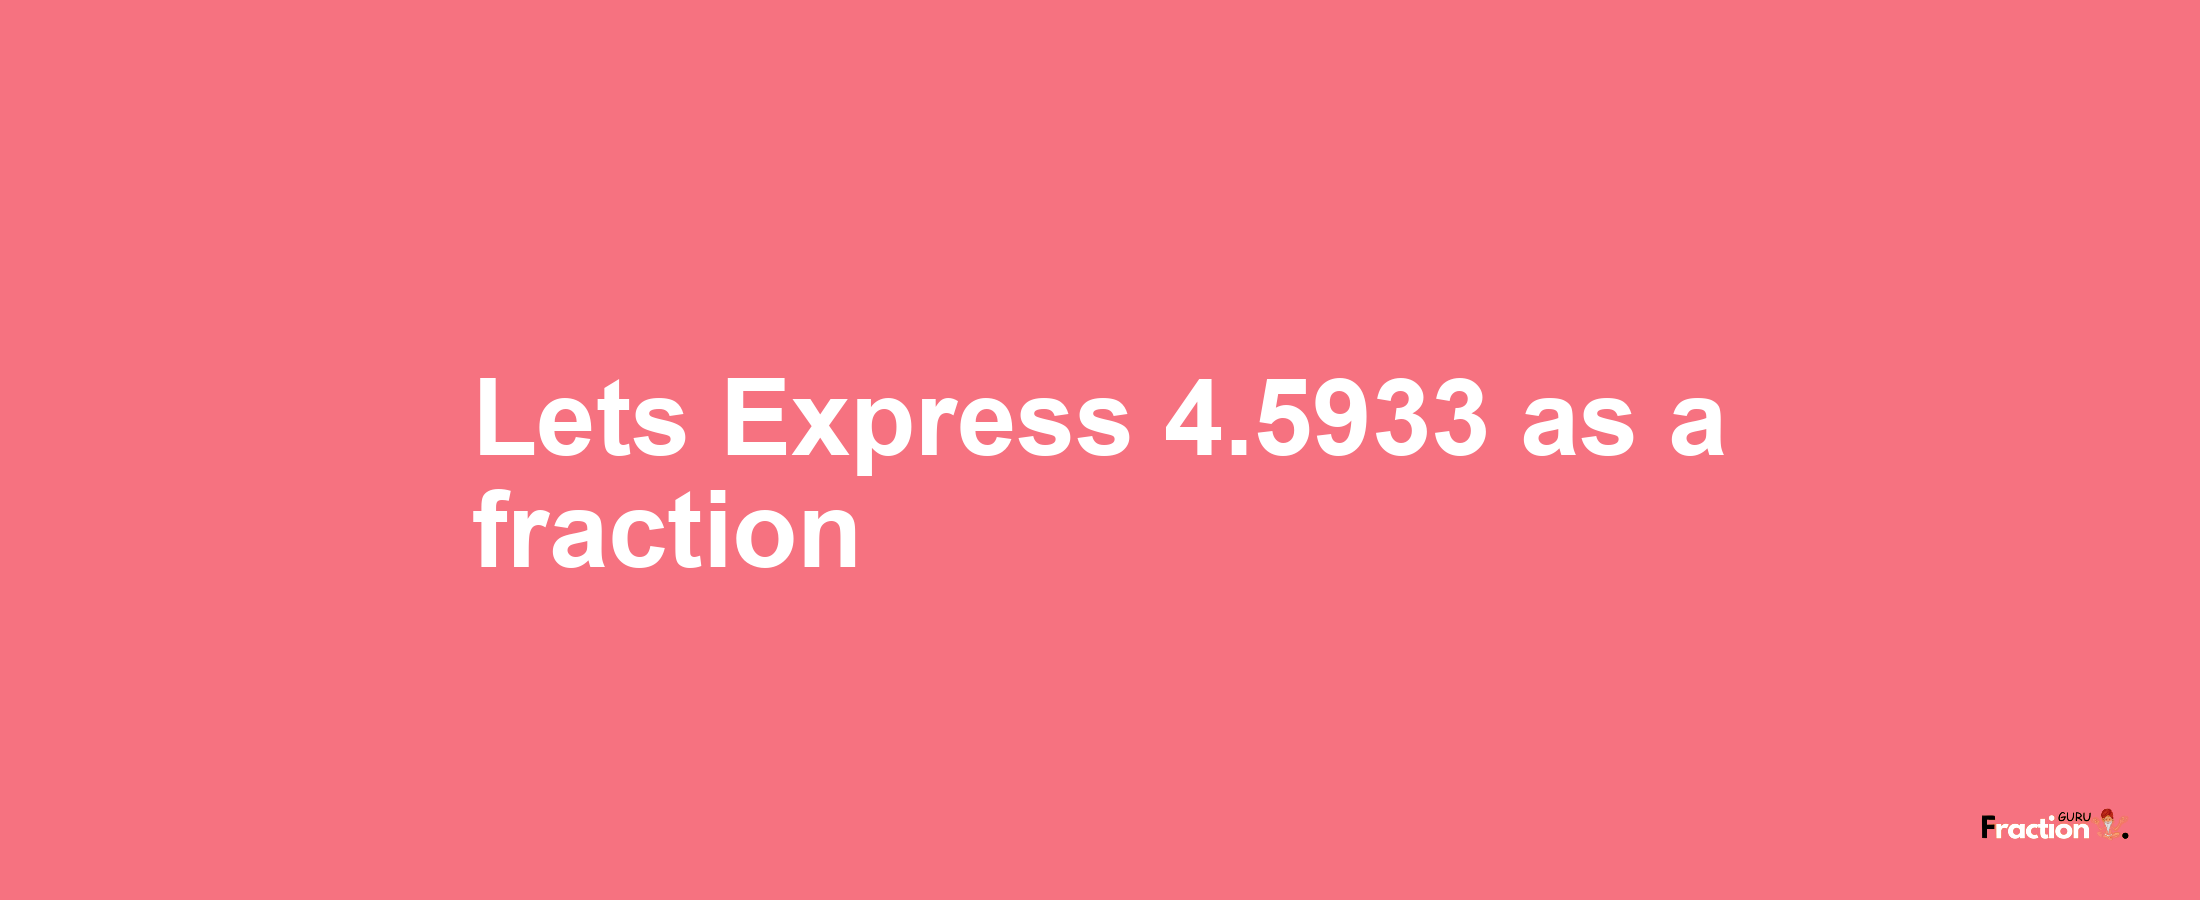 Lets Express 4.5933 as afraction